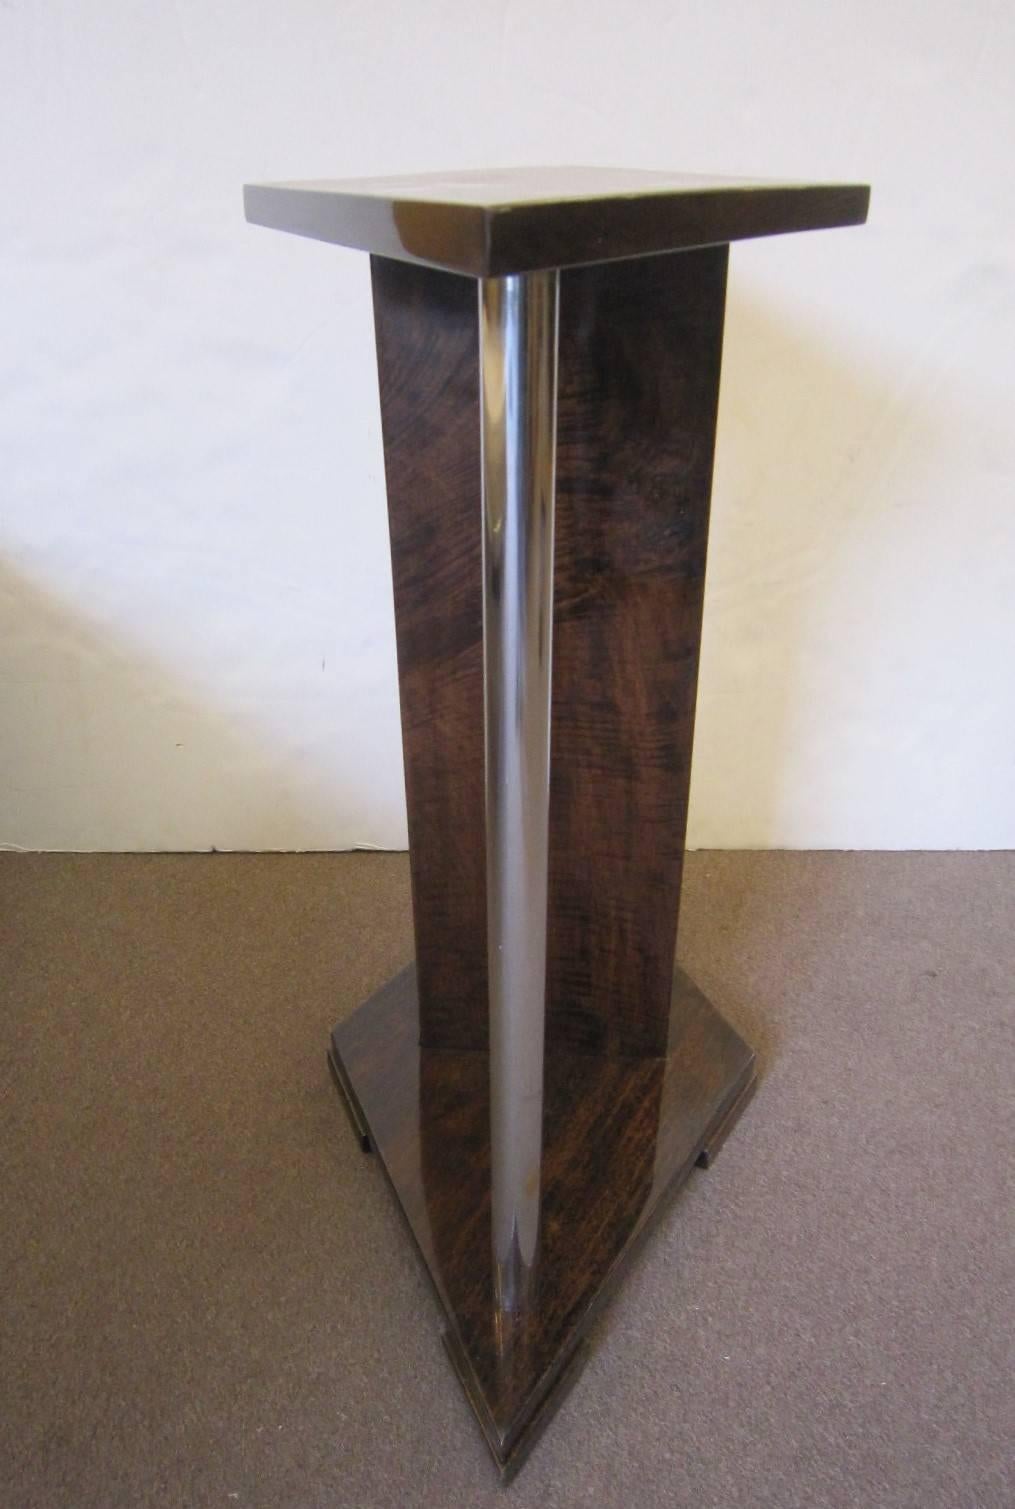 French Art Deco Unusual Diamond Shaped Walnut Side Table with Nickel Supports For Sale 5